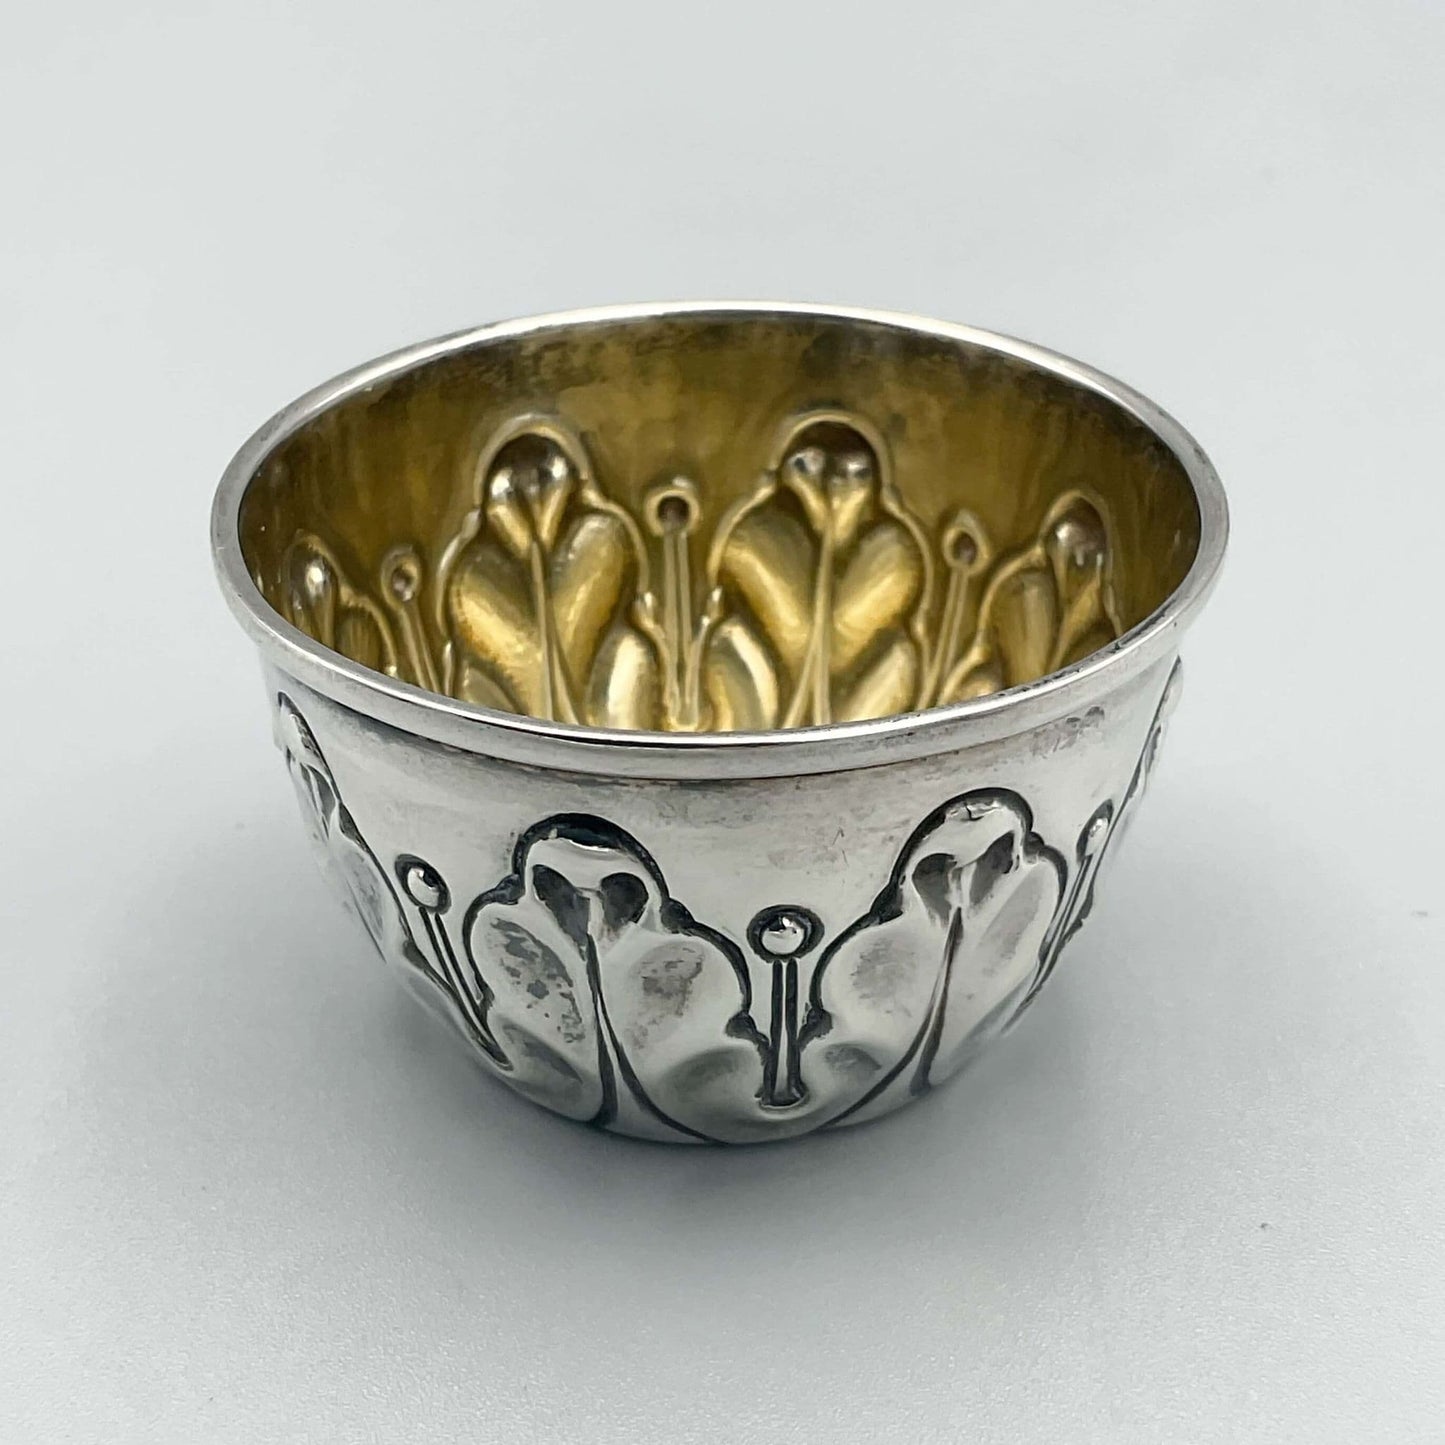 Antique Silver Salt pot with wavy design on outside and gilded interior on white background